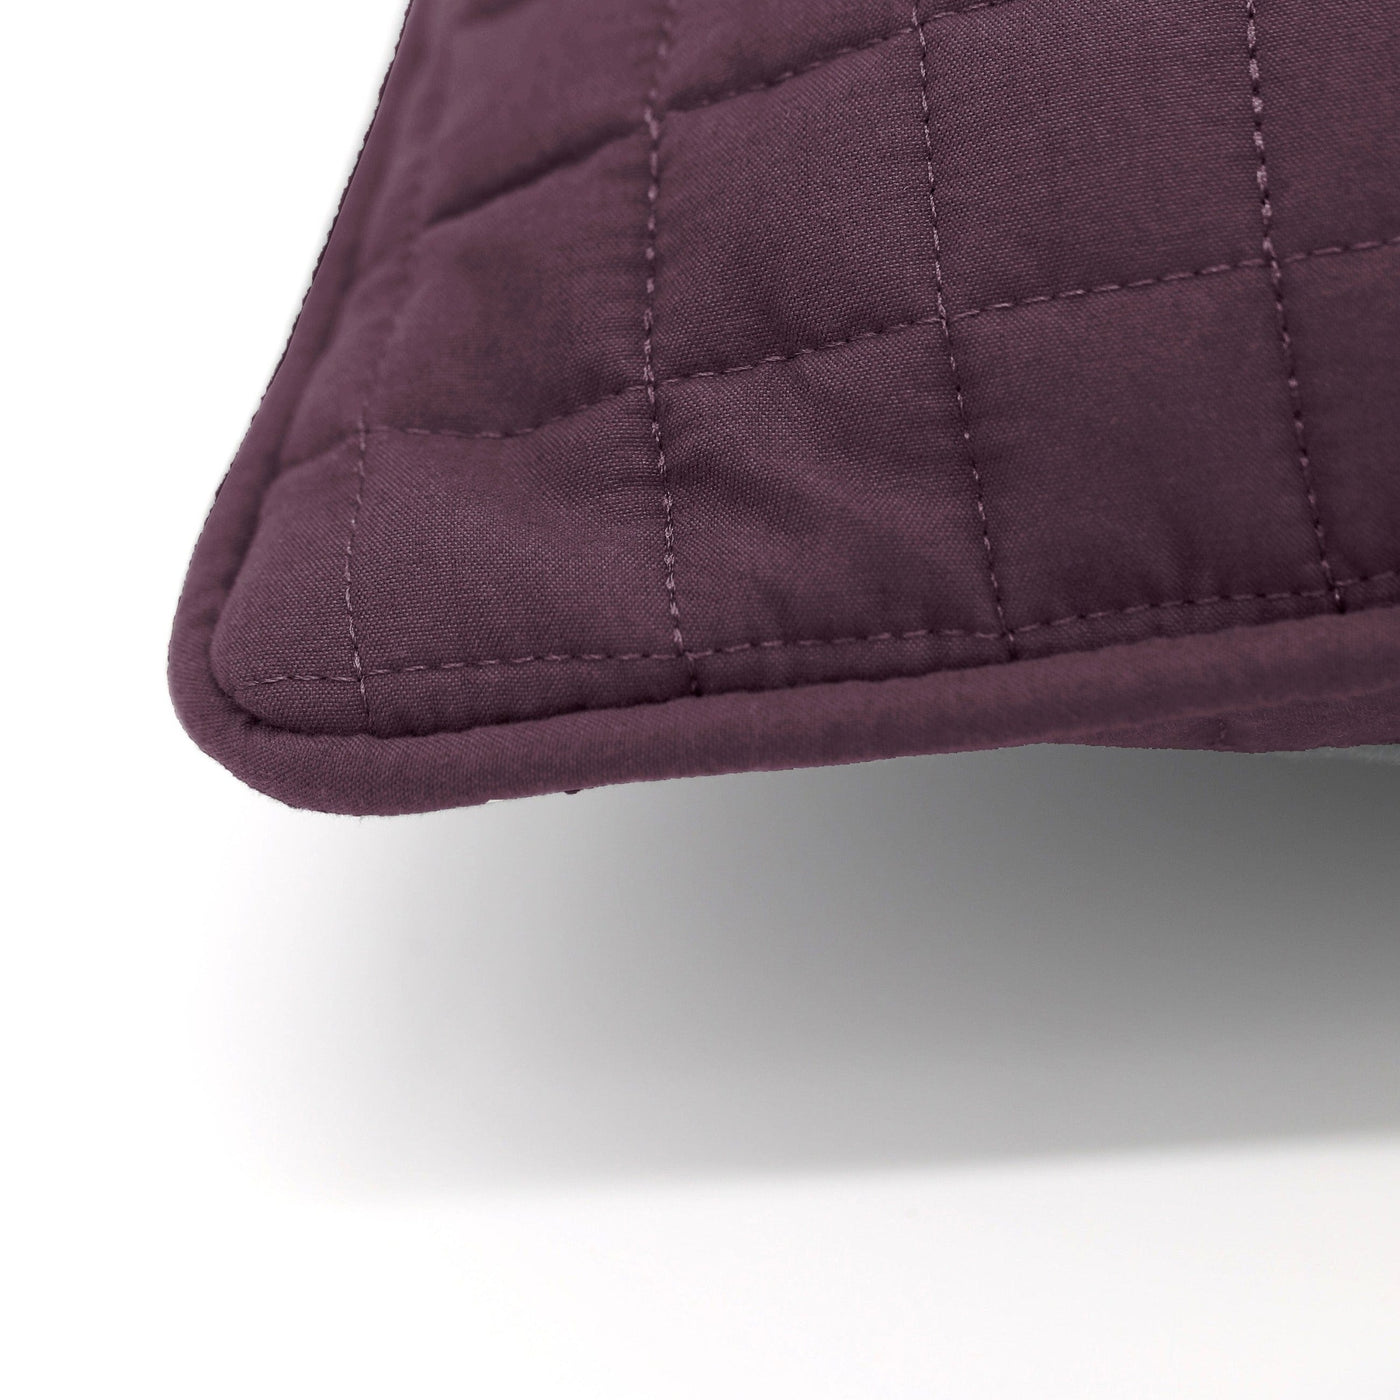 Details and Texture of Vilano Quilted Sham and Pillow Covers in Purple#color_vilano-purple